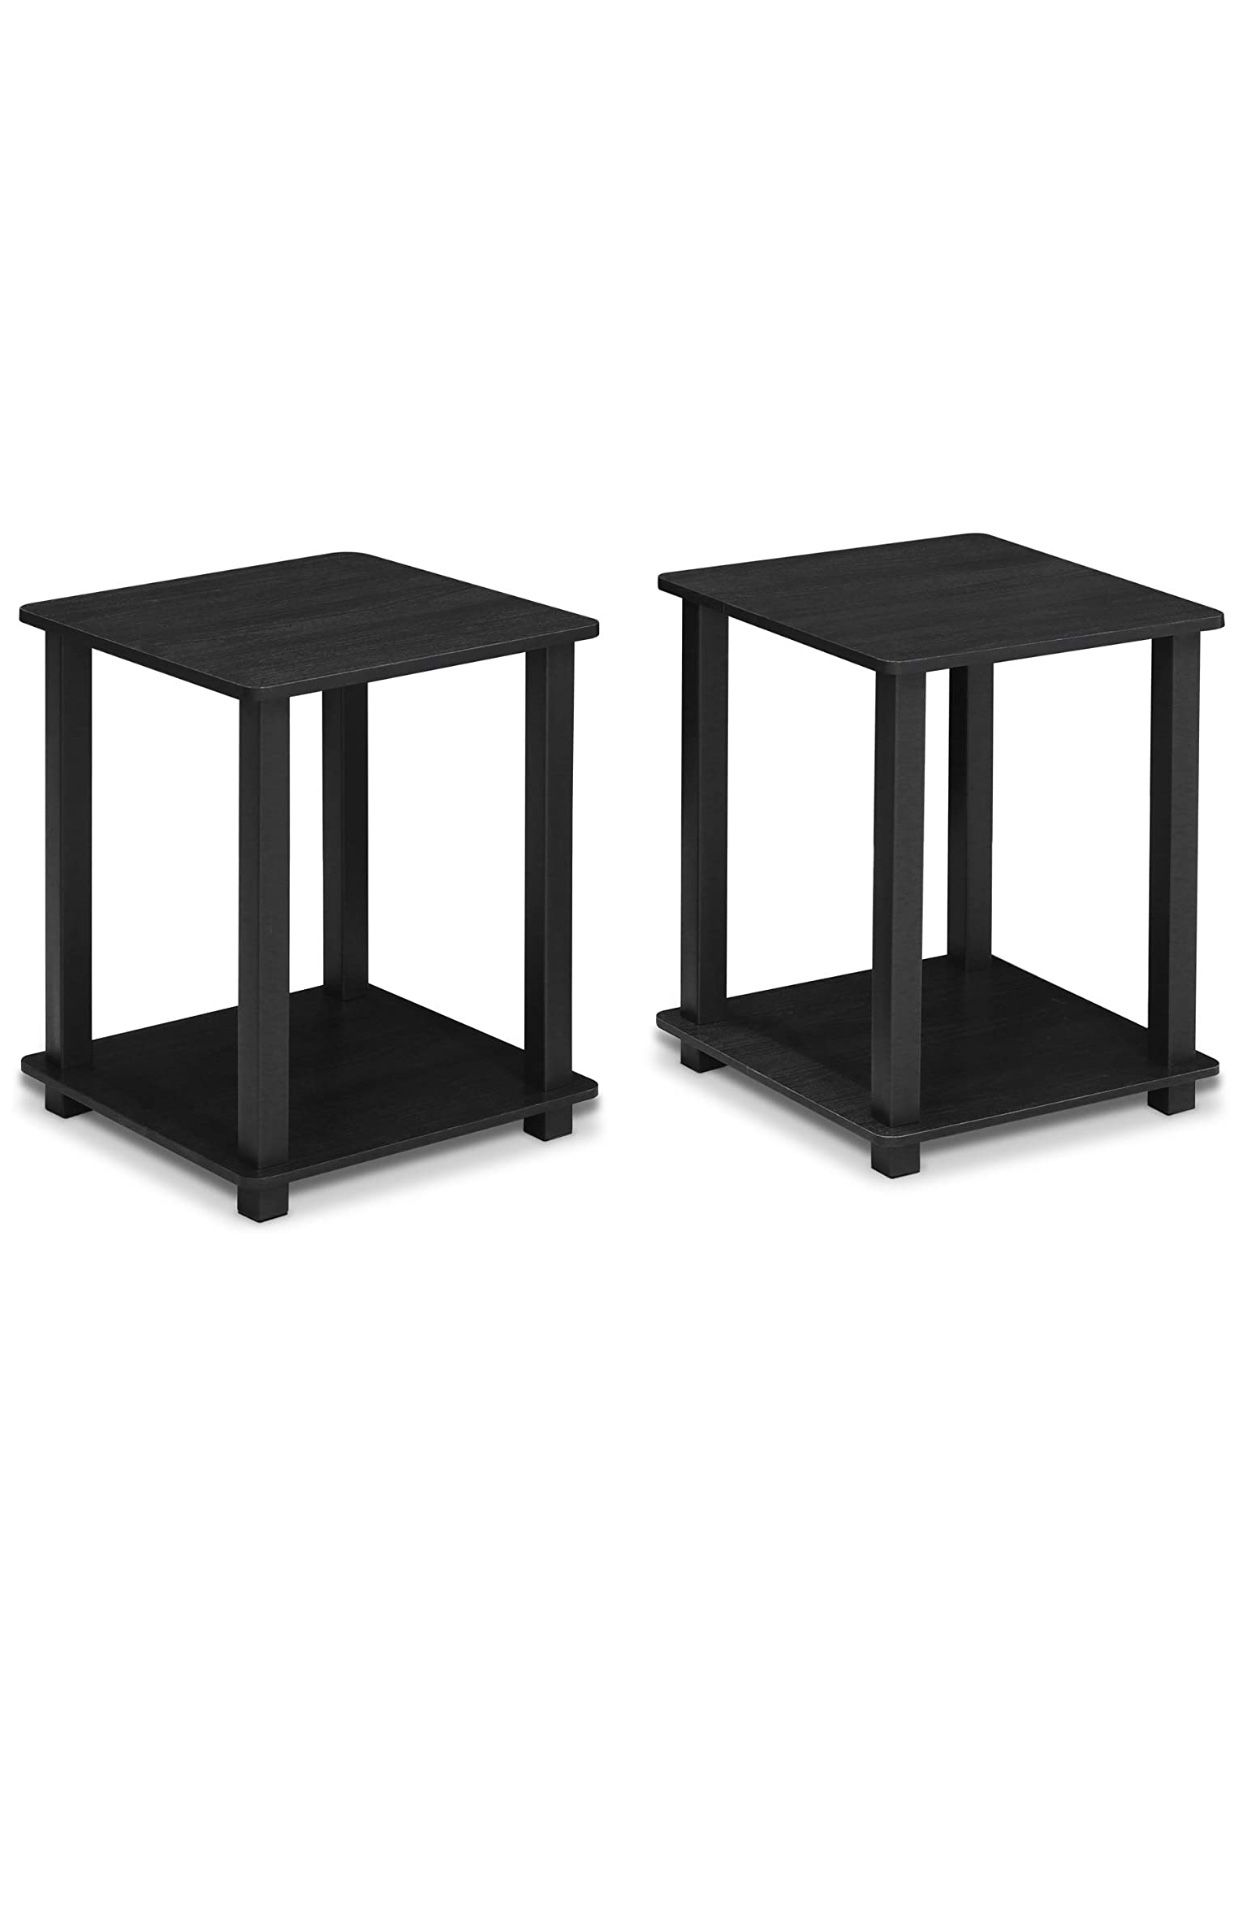 Americano/Black End Tables - Bought less than 6 months ago/Like NEW